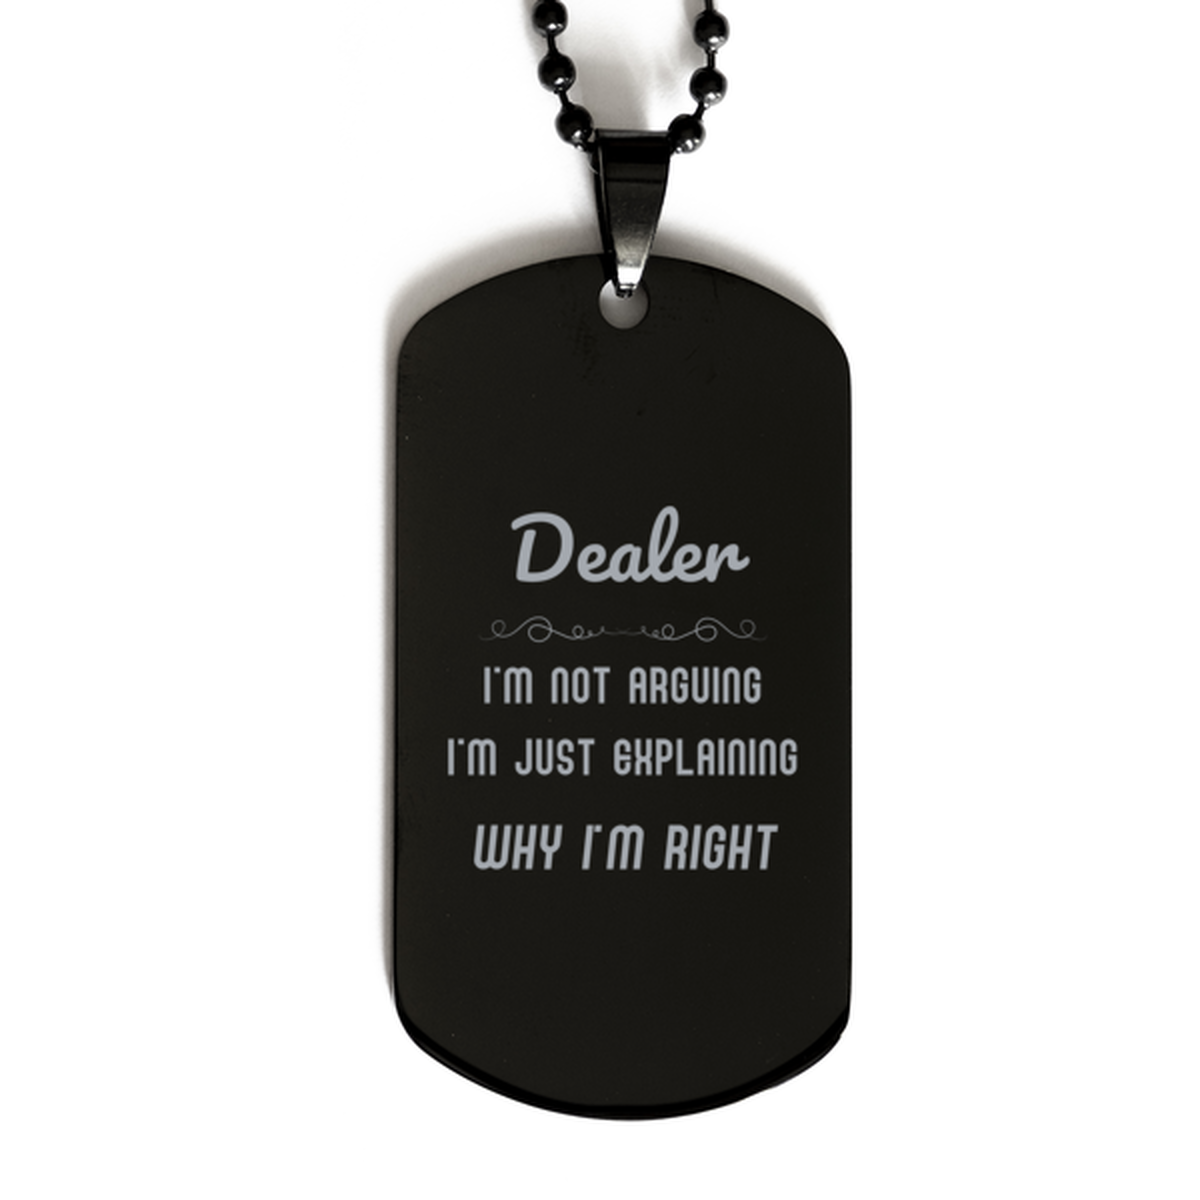 Dealer I'm not Arguing. I'm Just Explaining Why I'm RIGHT Black Dog Tag, Funny Saying Quote Dealer Gifts For Dealer Graduation Birthday Christmas Gifts for Men Women Coworker